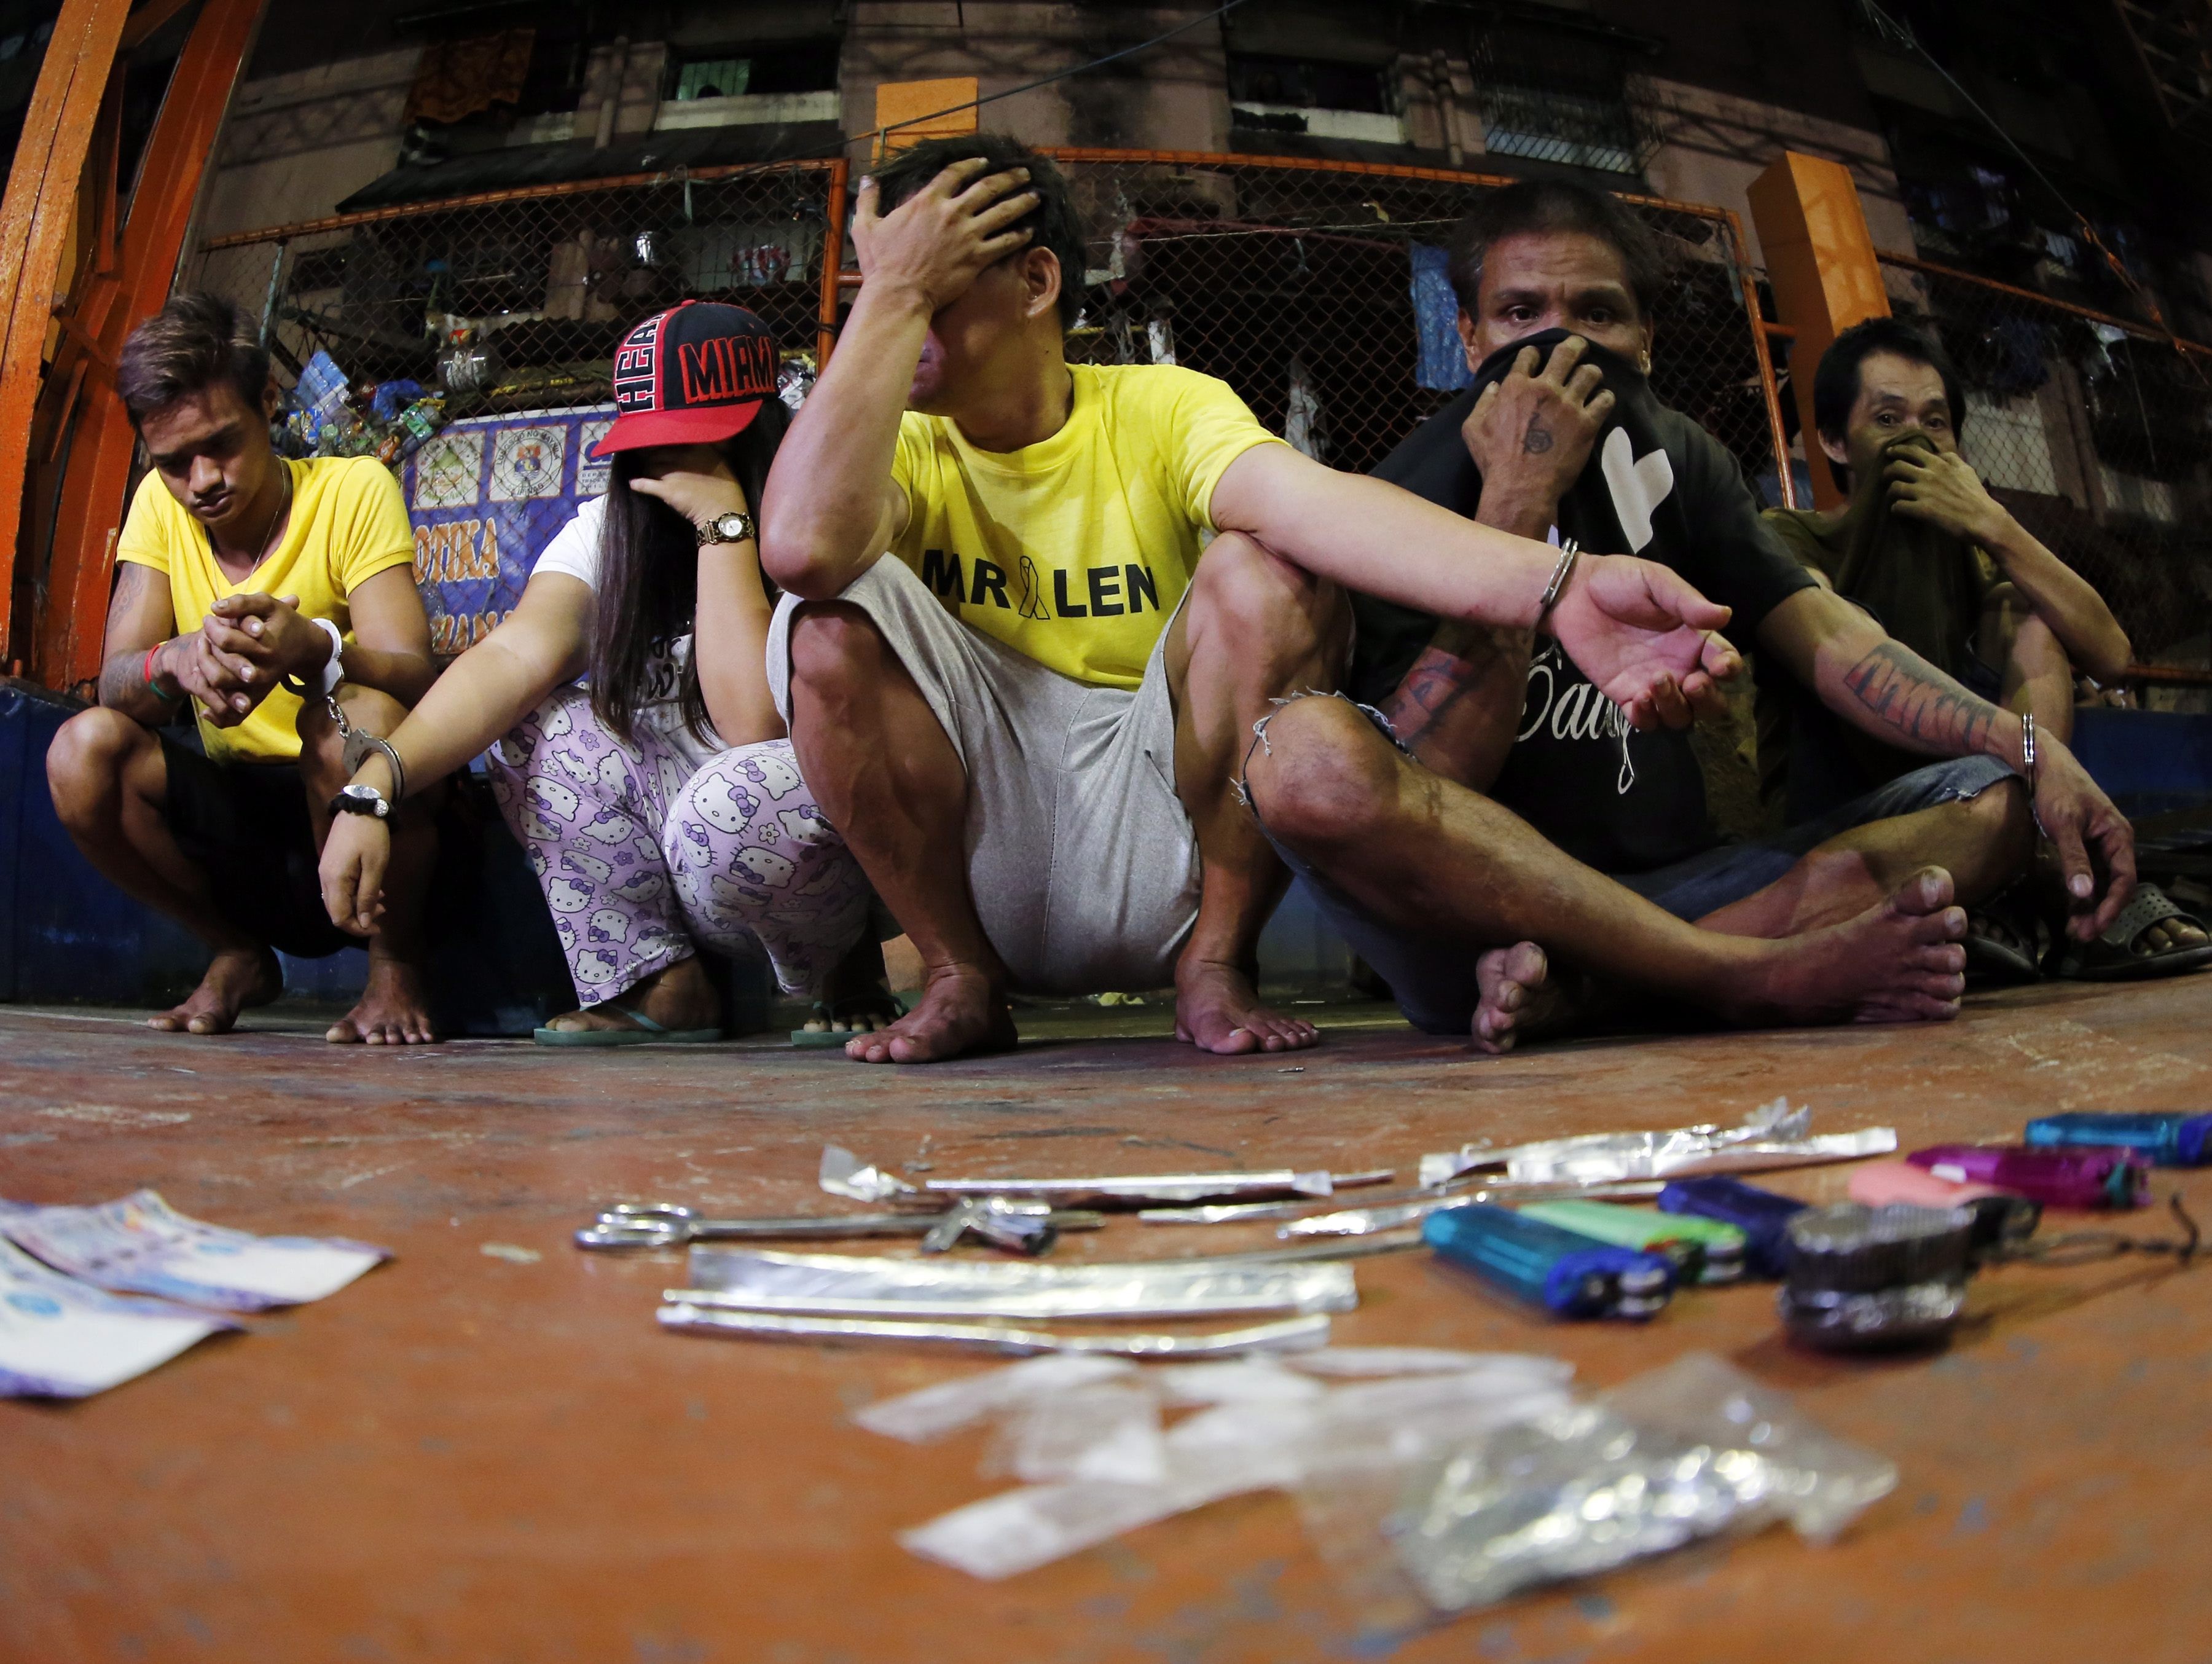 Filipinos arrested during a drug-buying operation wait to be brought to a police station for verification at a slum area in Manila in September 2016. According to the Philippine government, President Rodrigo Duterte’s war on drugs had resulted in more than 5,000 deaths at the end of 2018, though opposition politicians and human rights groups place the toll as high as 20,000. Photo: EPA